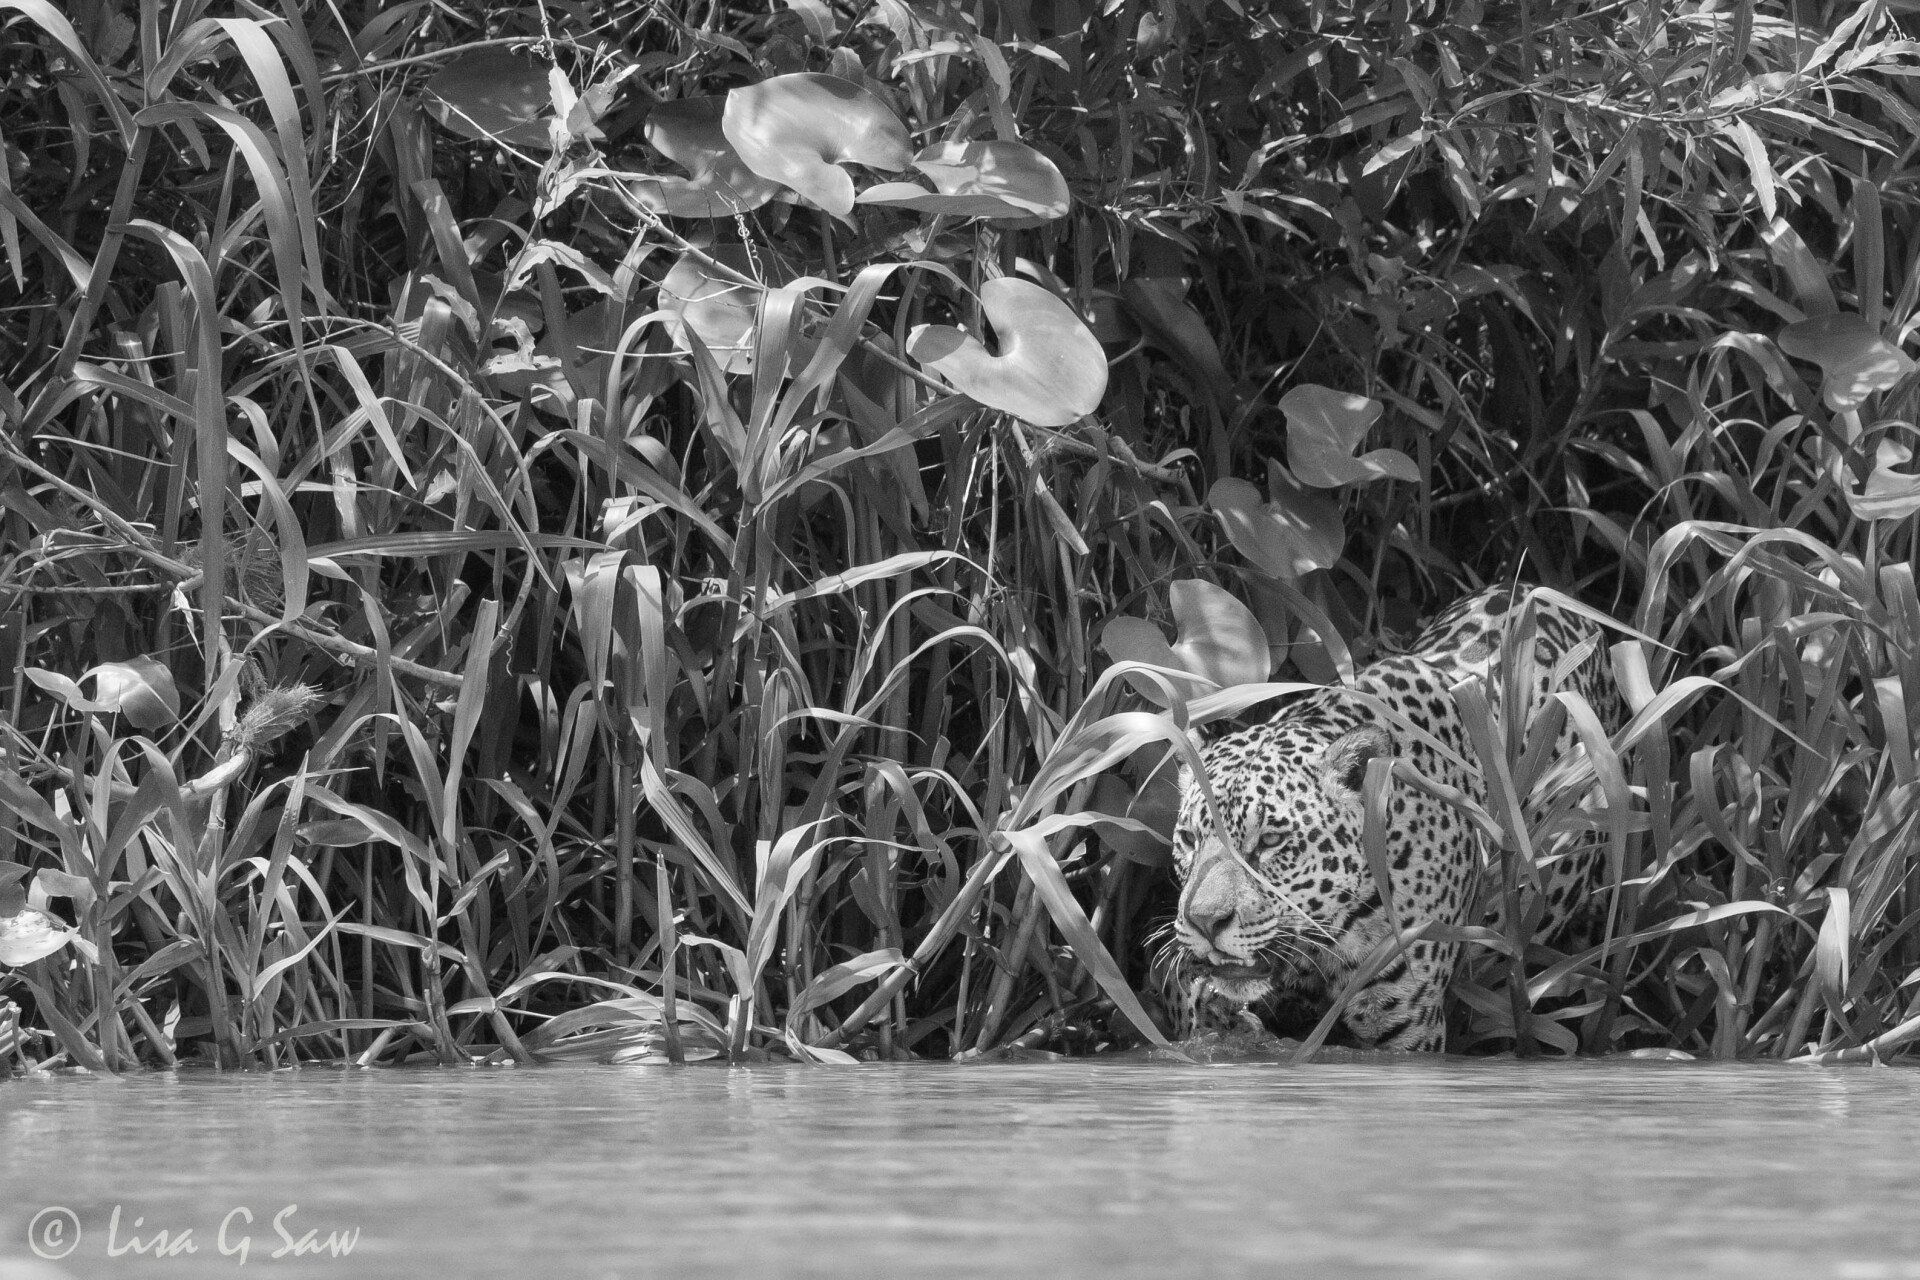 Jaguar emerging from tall reeds (black and white)